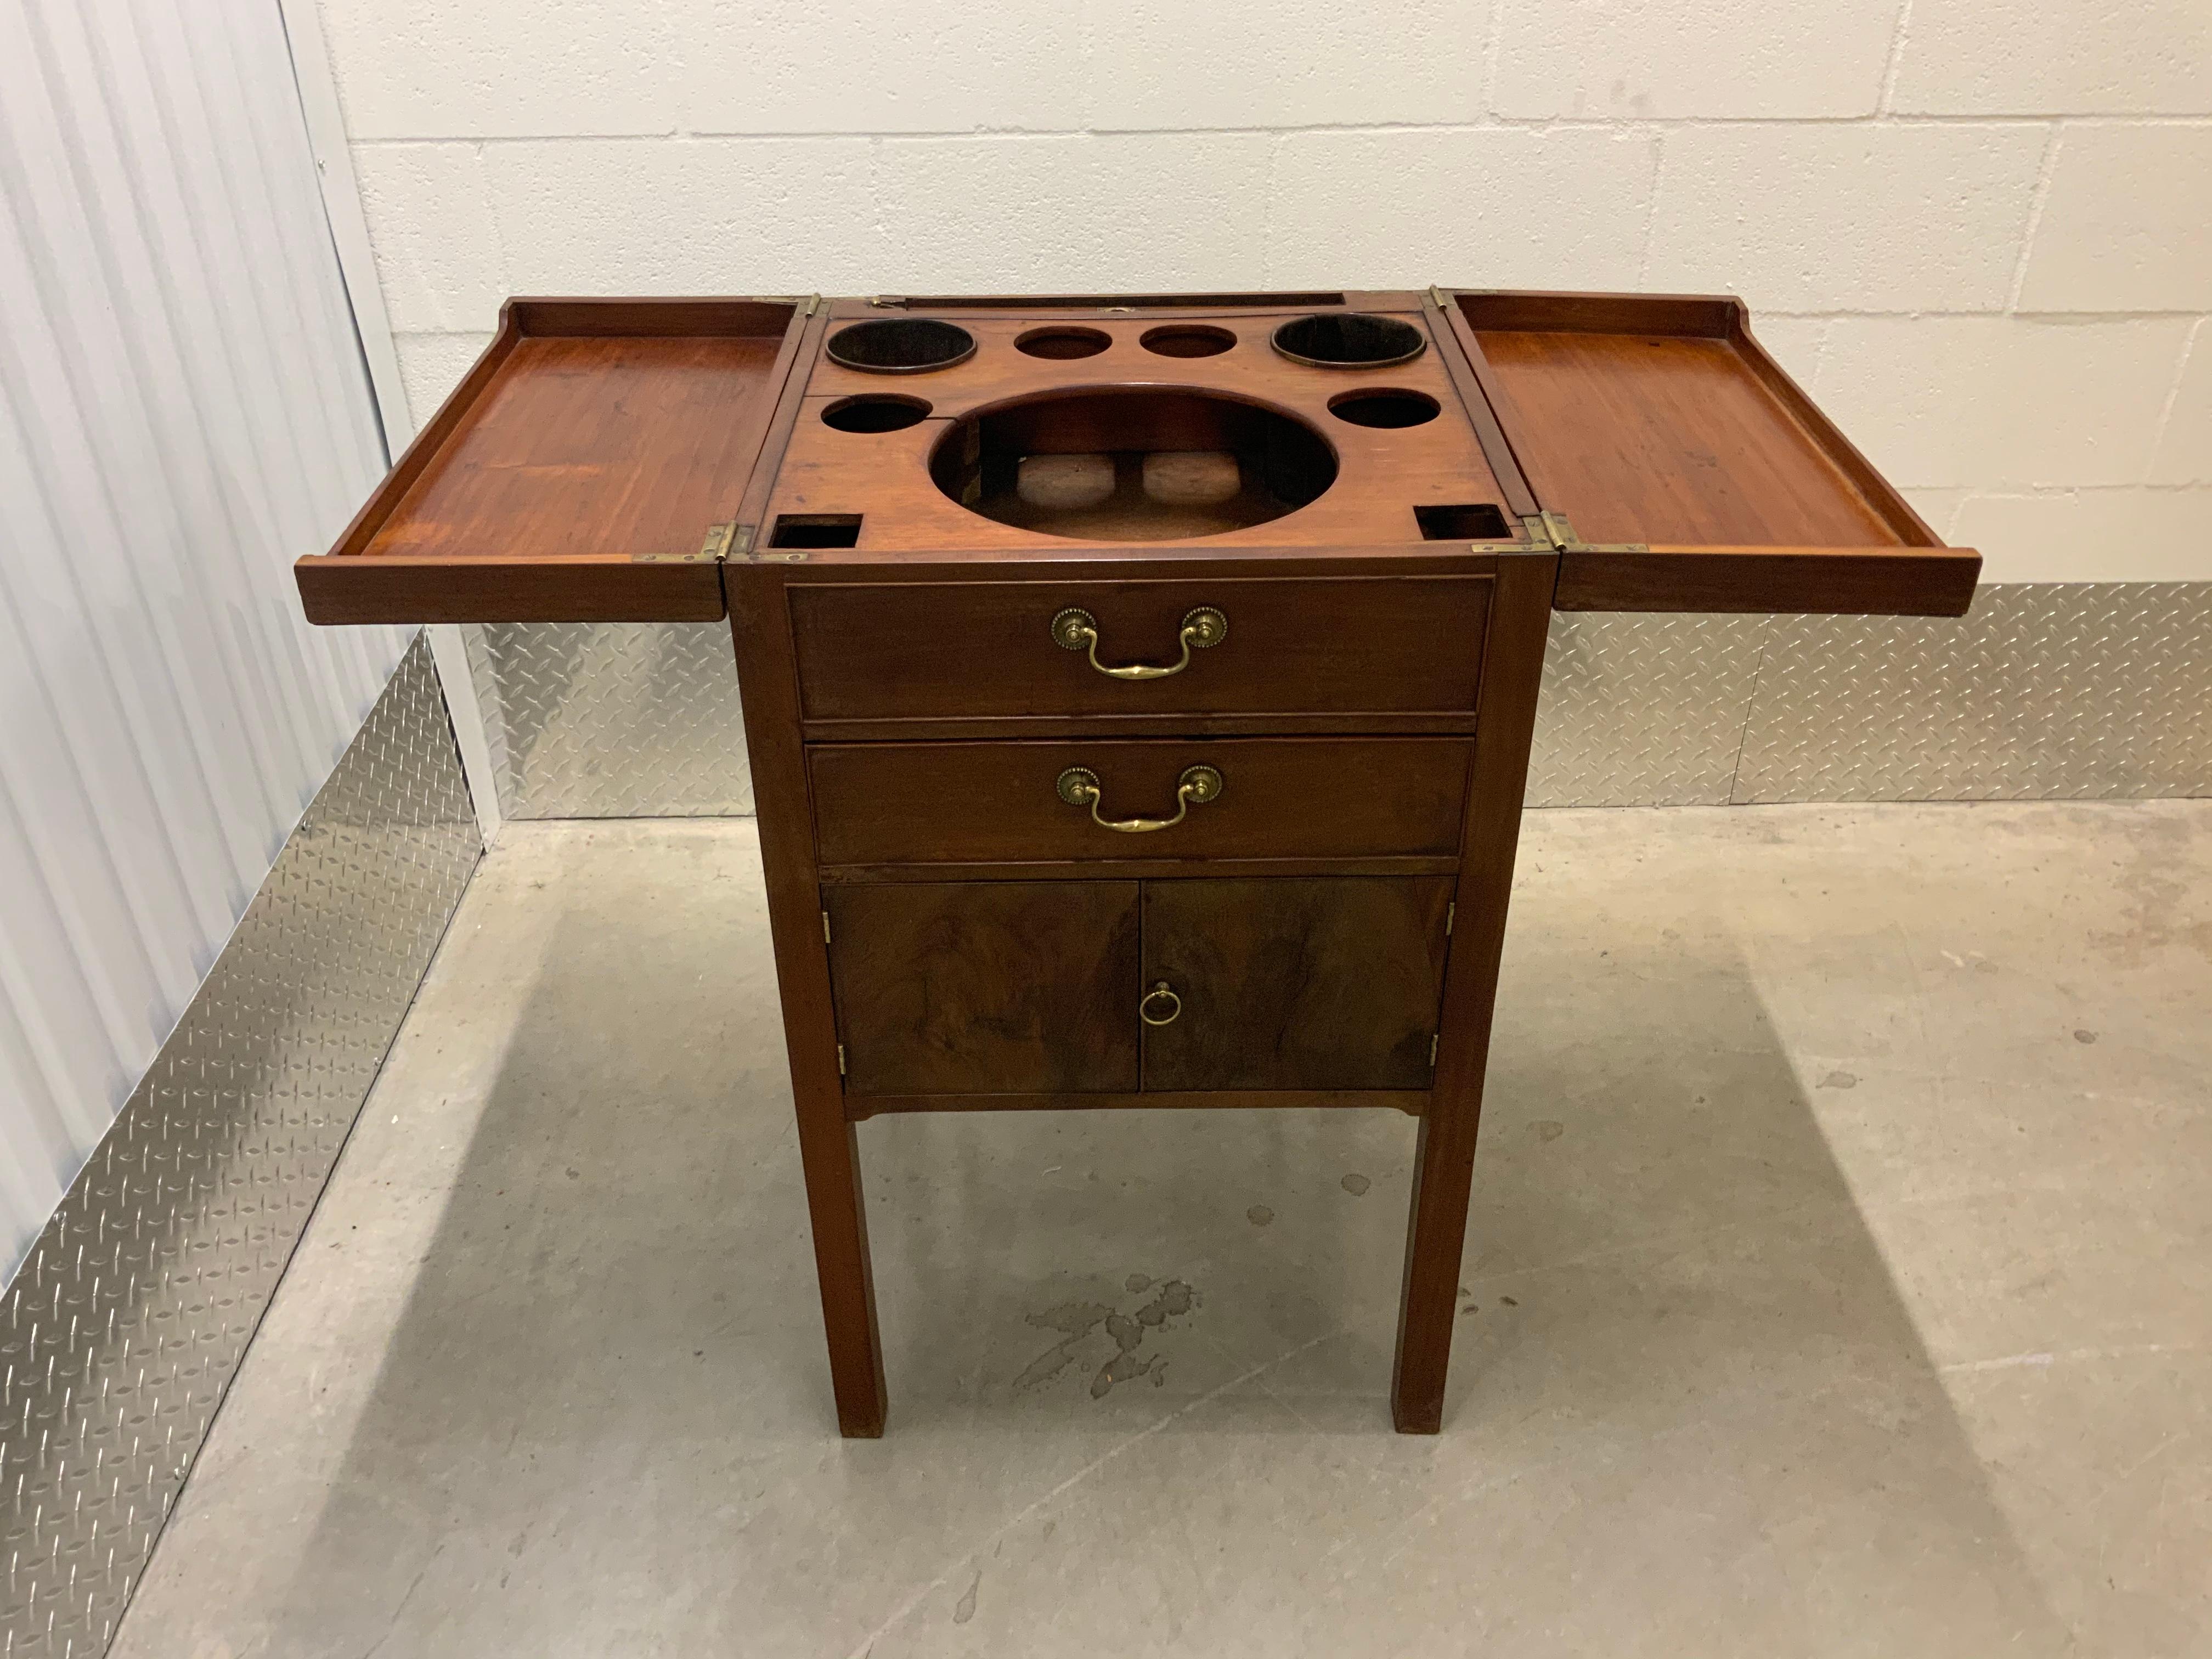 Georgian Gentleman’s Mahogany wash or basin stand 1795-1810. This is a very well constructed piece with all case and drawer pieces nicely dovetailed together including the mirror frame and the hinged lids. The retractable mirror lifts up with a ring